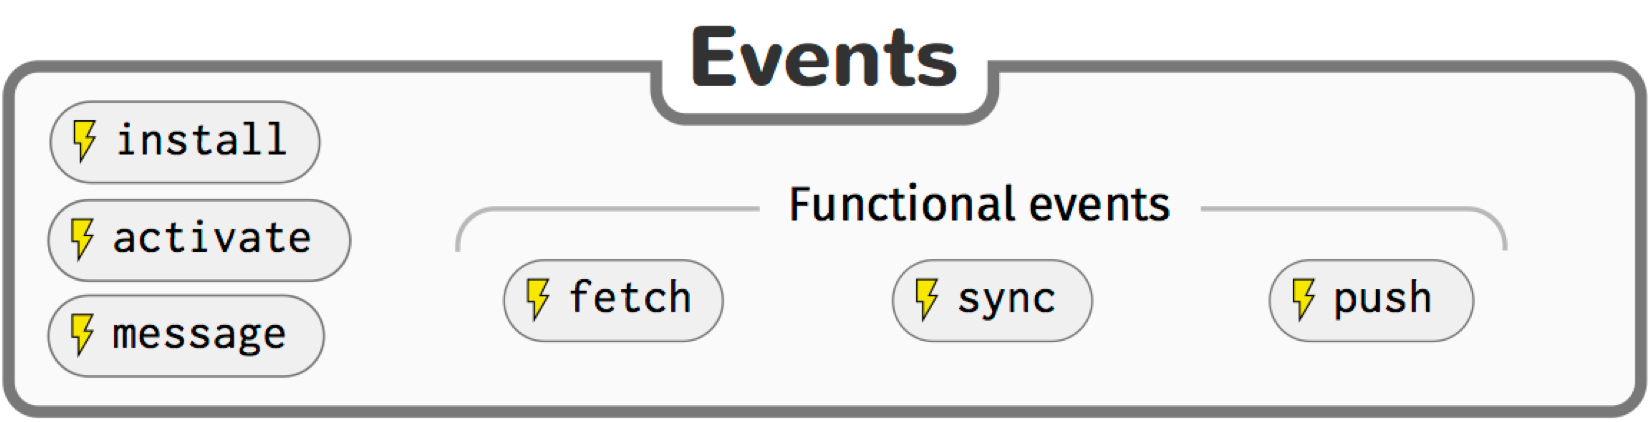 Functional events are fetch, push, sync and other